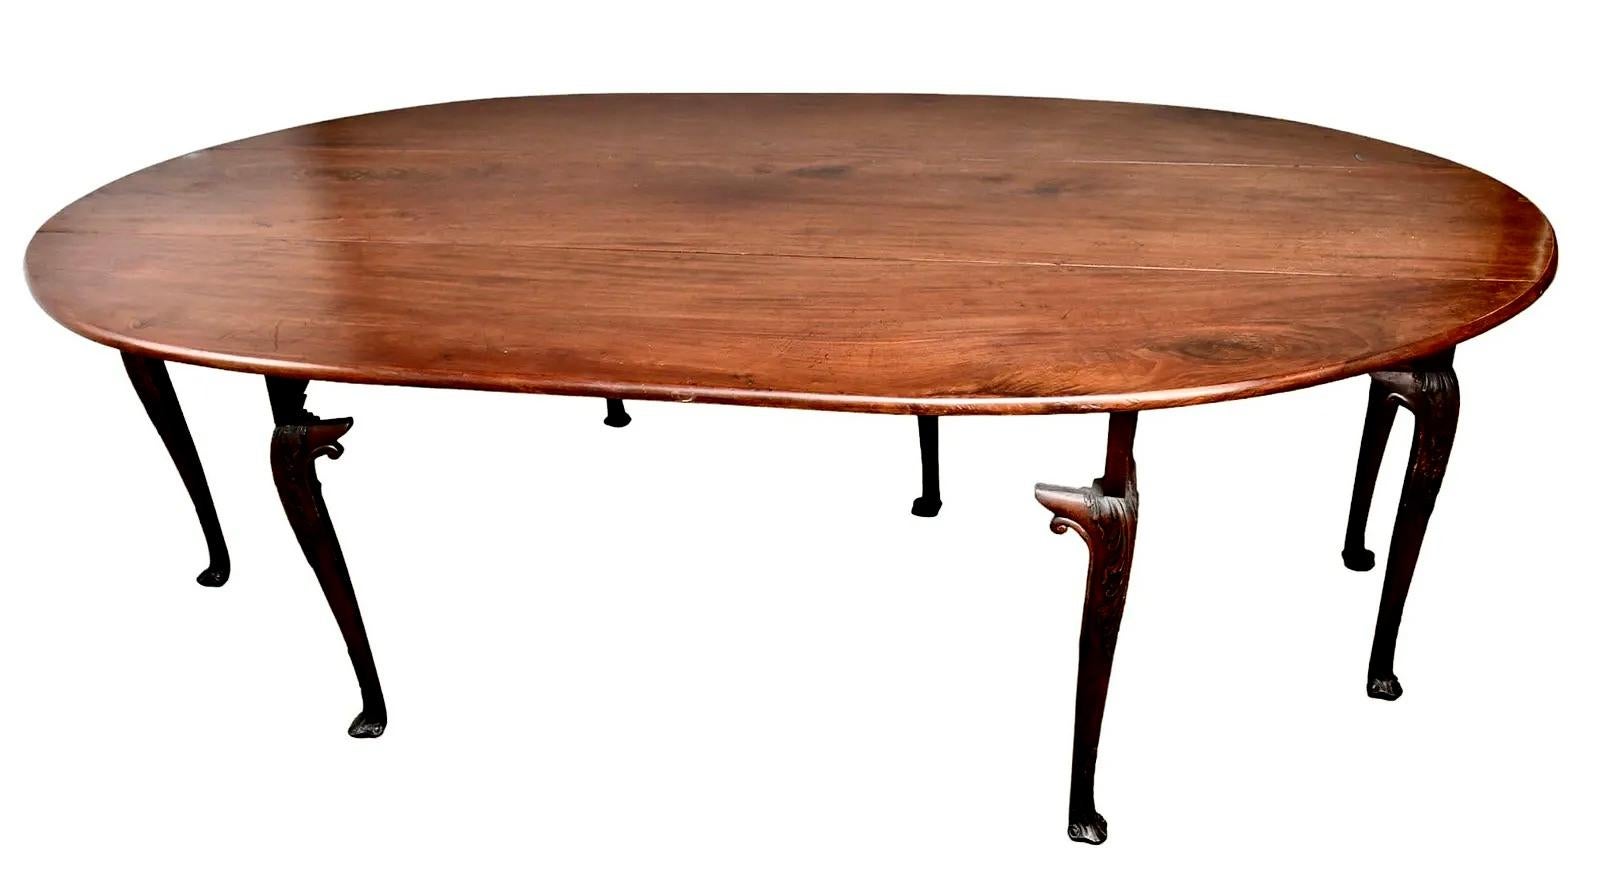 Irish Georgian Large Wake Table. Dining Table.  Great Mahogany board top.  Legs with carved knees and Spanish feet.  Legs and apron retaining 